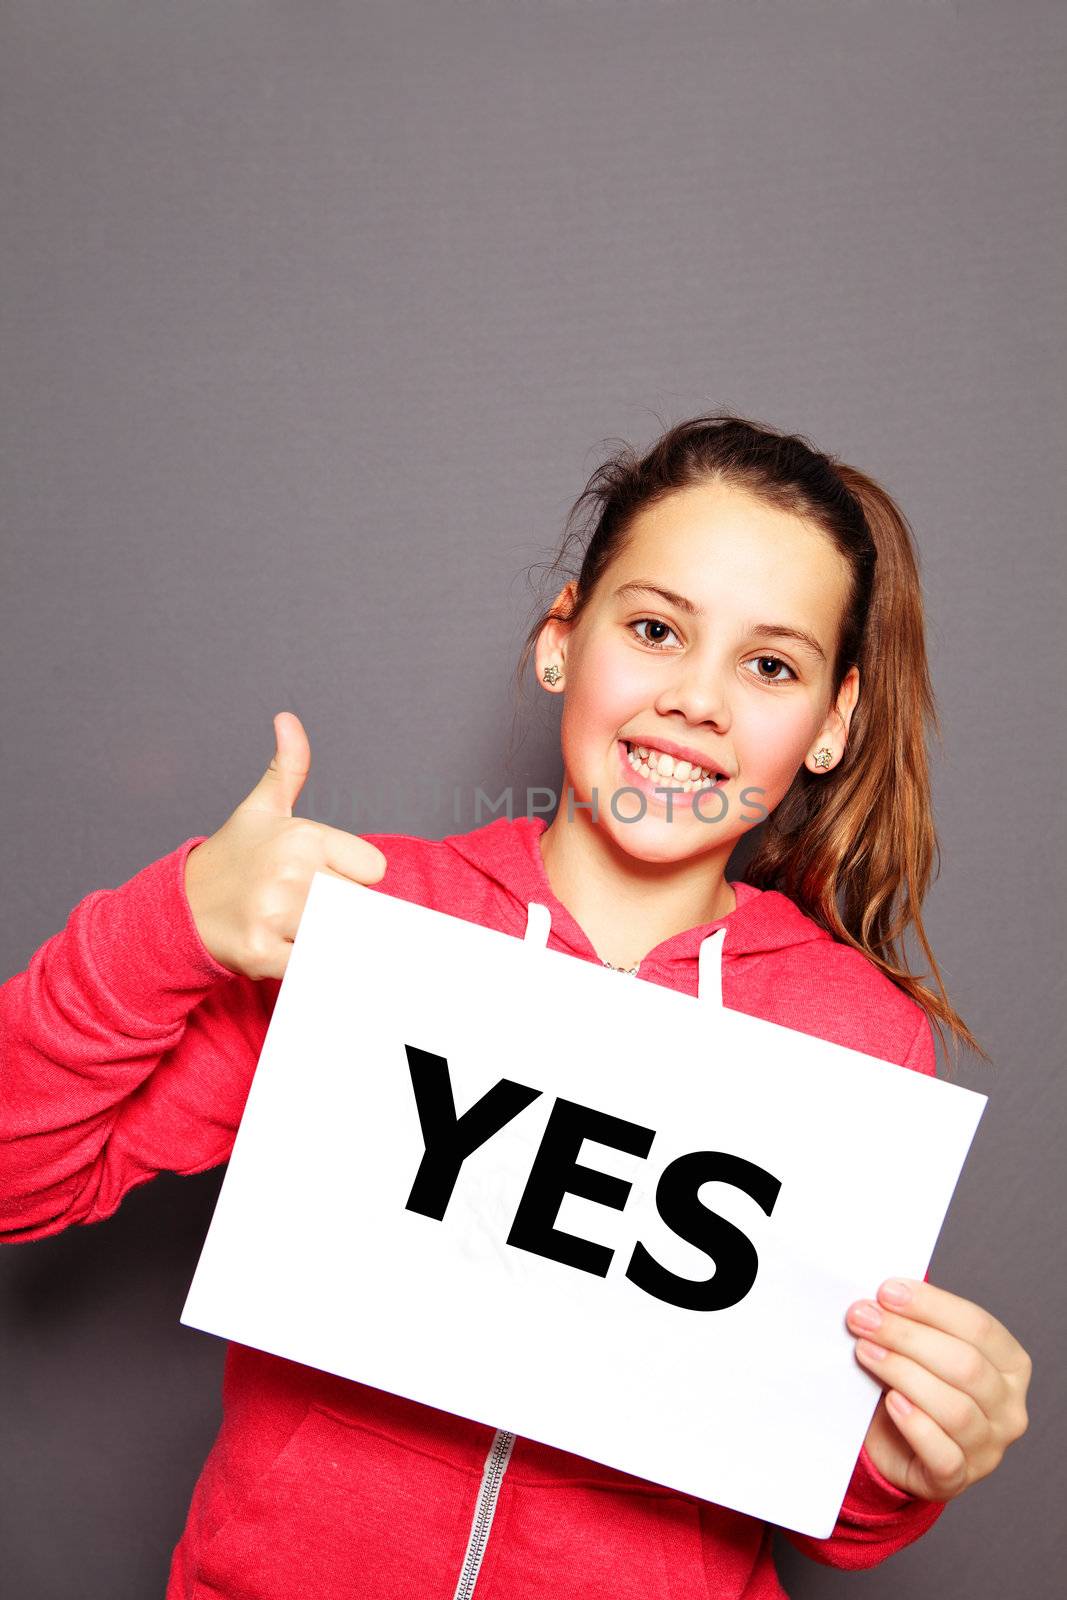 Beautiful enthusiastic happy little girl with a typewritten YES sign giving a thumbs up gesture of approval and agreement, studio upper body portrait on a grey background with copyspace